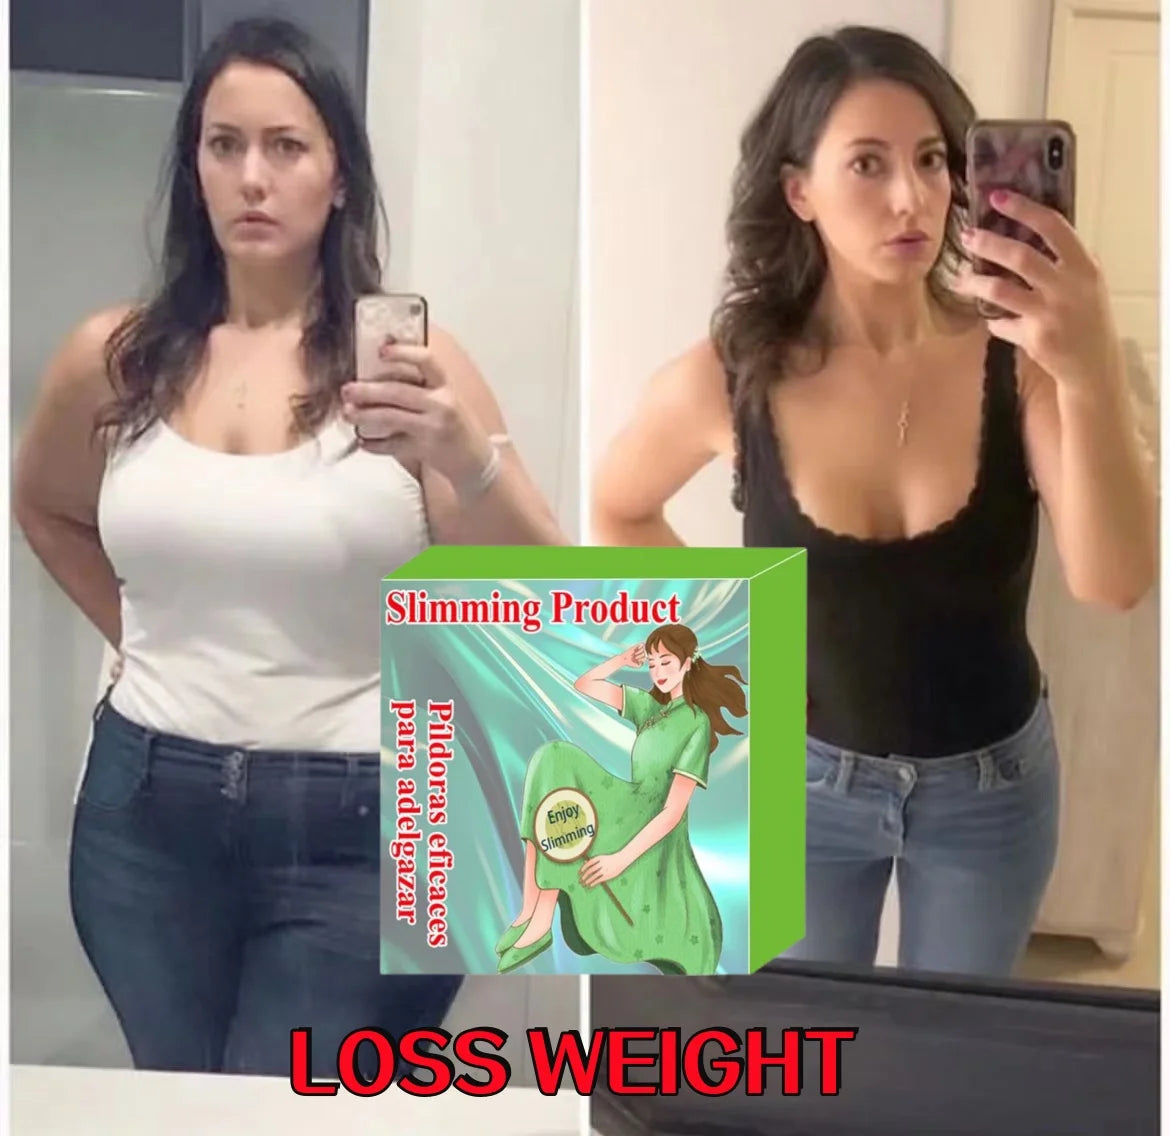 Fast Lose 20Kg in 30Days Enhanced Weight Loss Slim Products Lean Belly Body than Daidaihua Burning Fat Beauty Health Care